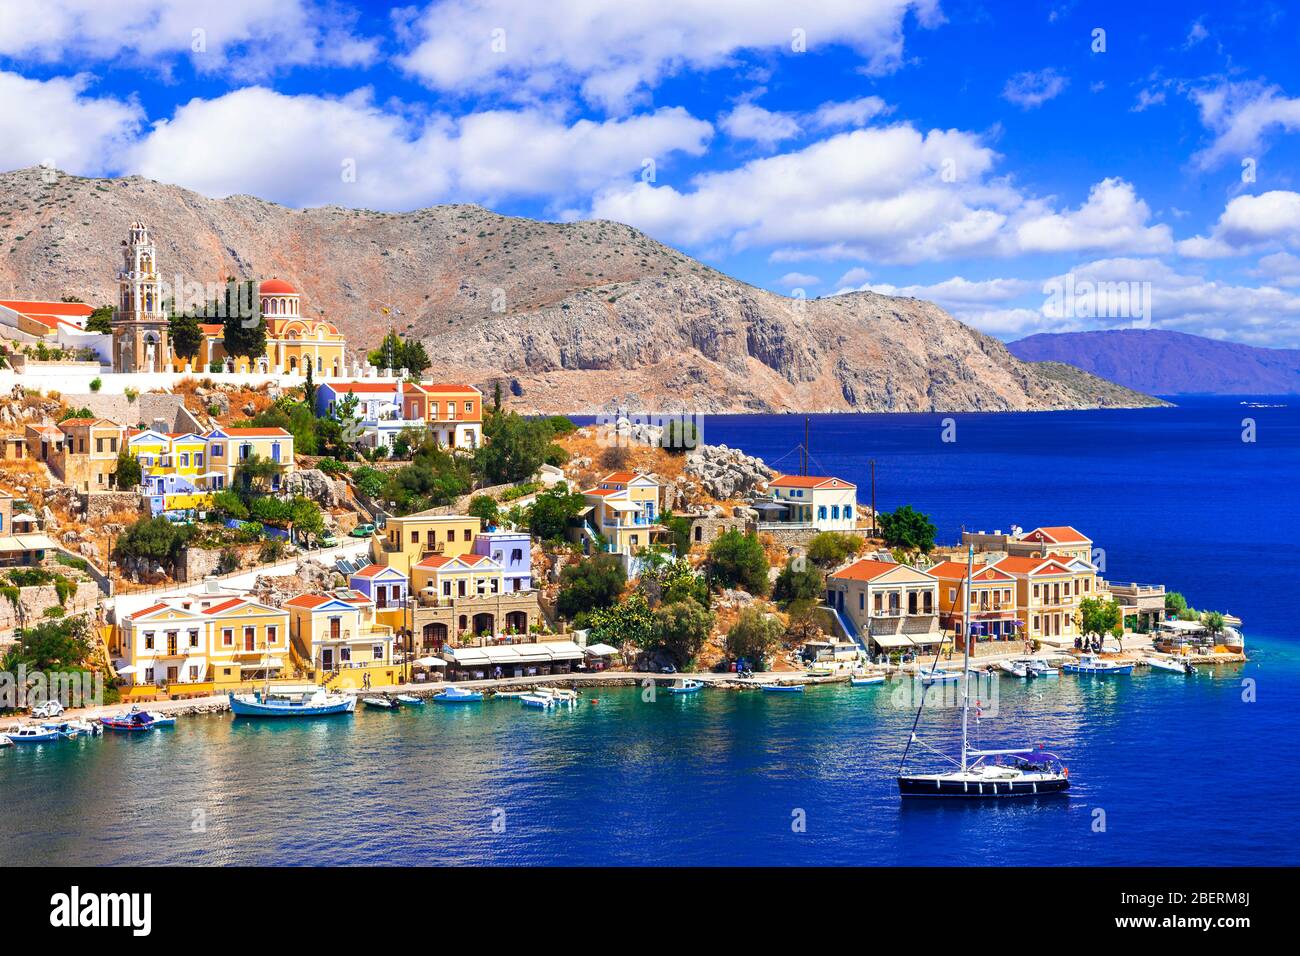 Beautiful view of the colorful houses and Mediterranean Sea in